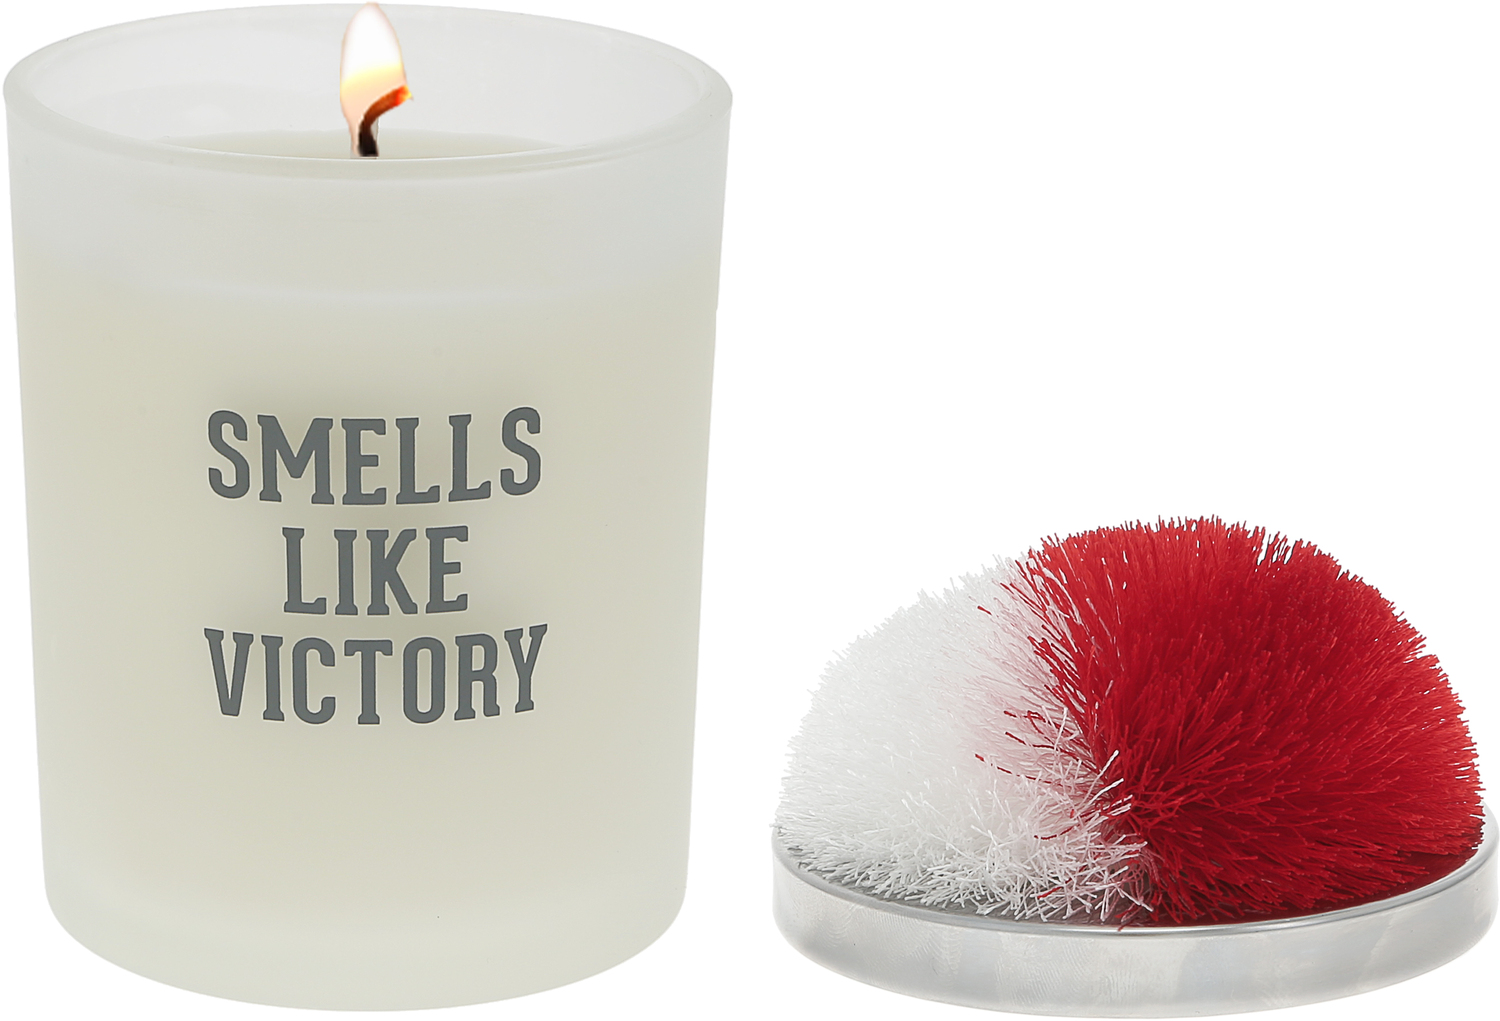 Victory - Red & White by Repre-Scent - Victory - Red & White - 5.5 oz - 100% Soy Wax Candle with Pom Pom Lid
Scent: Tranquility